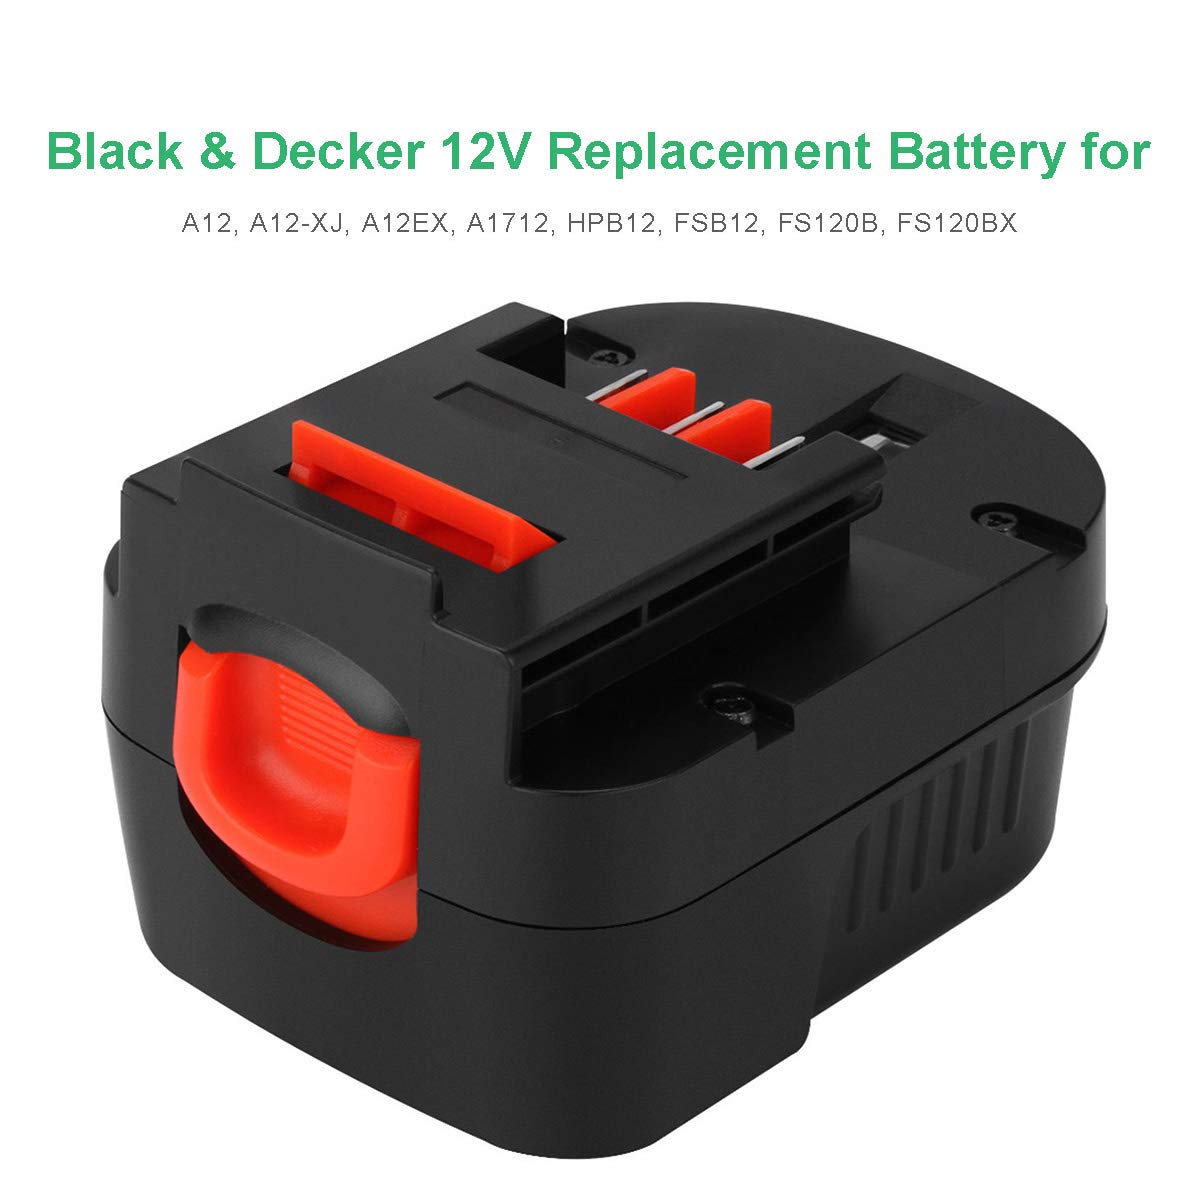 Upgraded 12V 4800mAh Replacement for Black and Decker HBP12 NI-MH Battery | A1712 FS120B FSB12 HPB12 A12 A12-XJ A12EX FS120B FSB12 FS120BX Battery